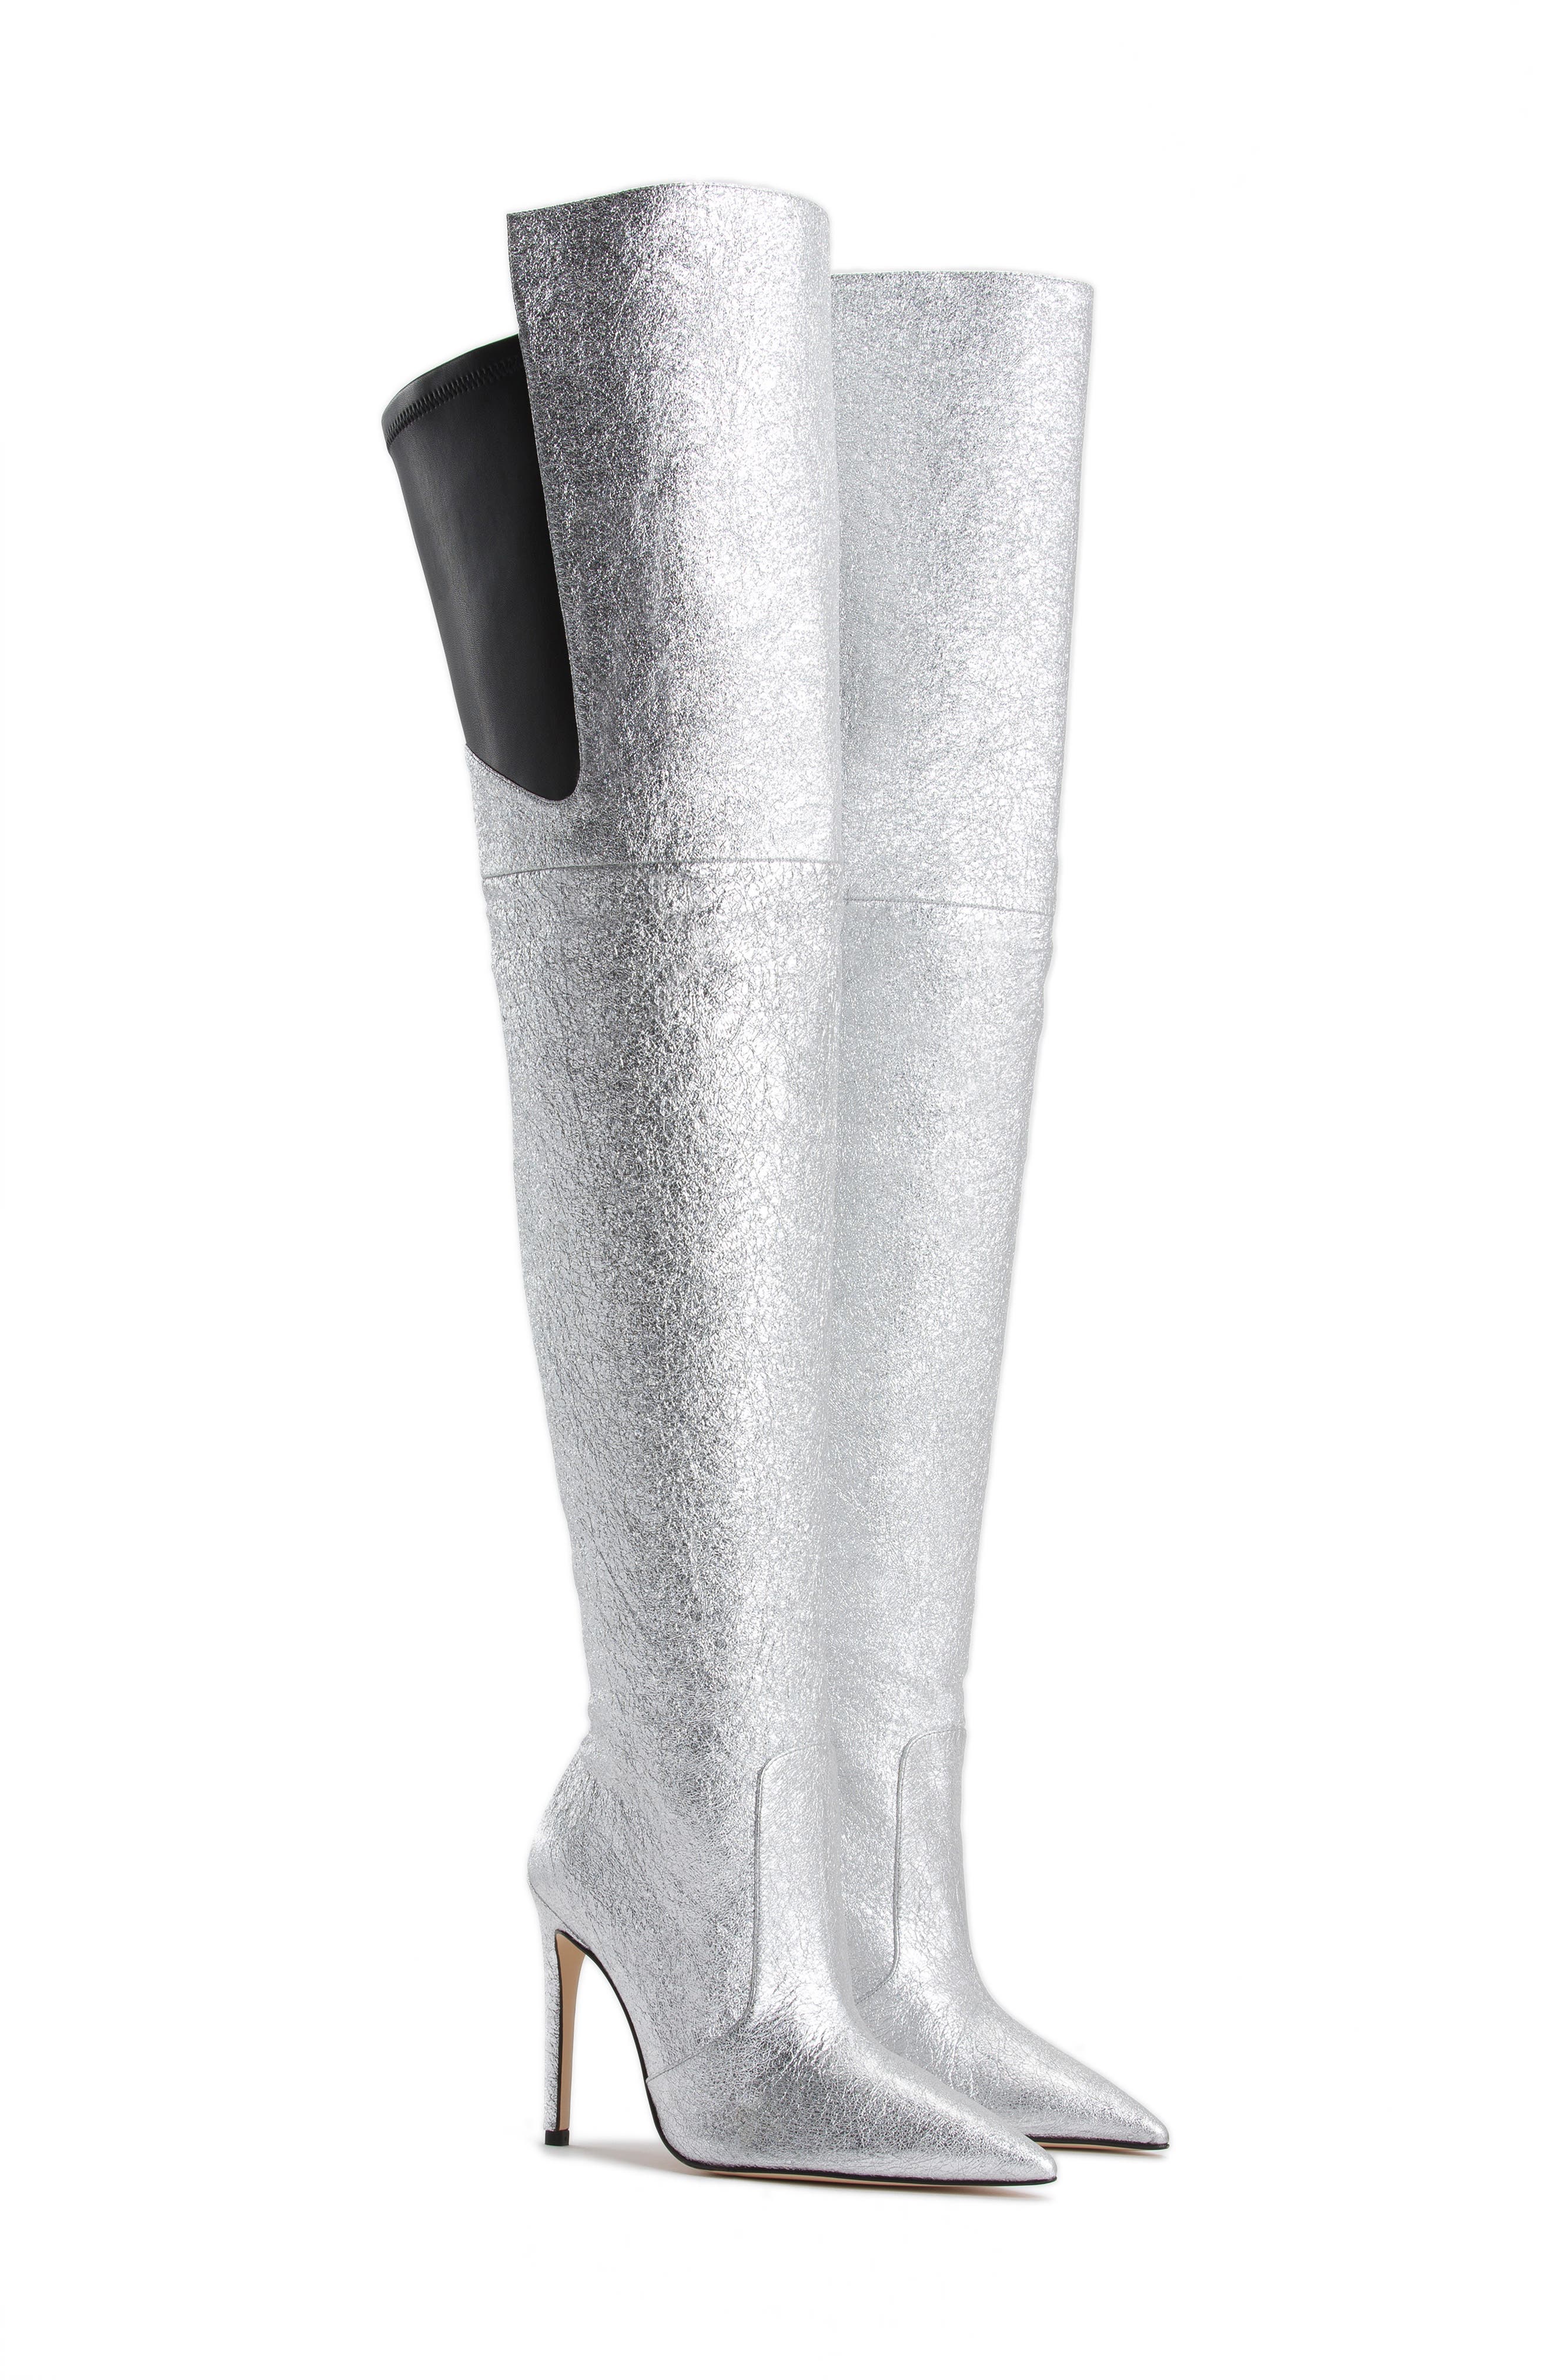 GOOD AMERICAN THE EMMA OVER THE KNEE BOOT,019570915447